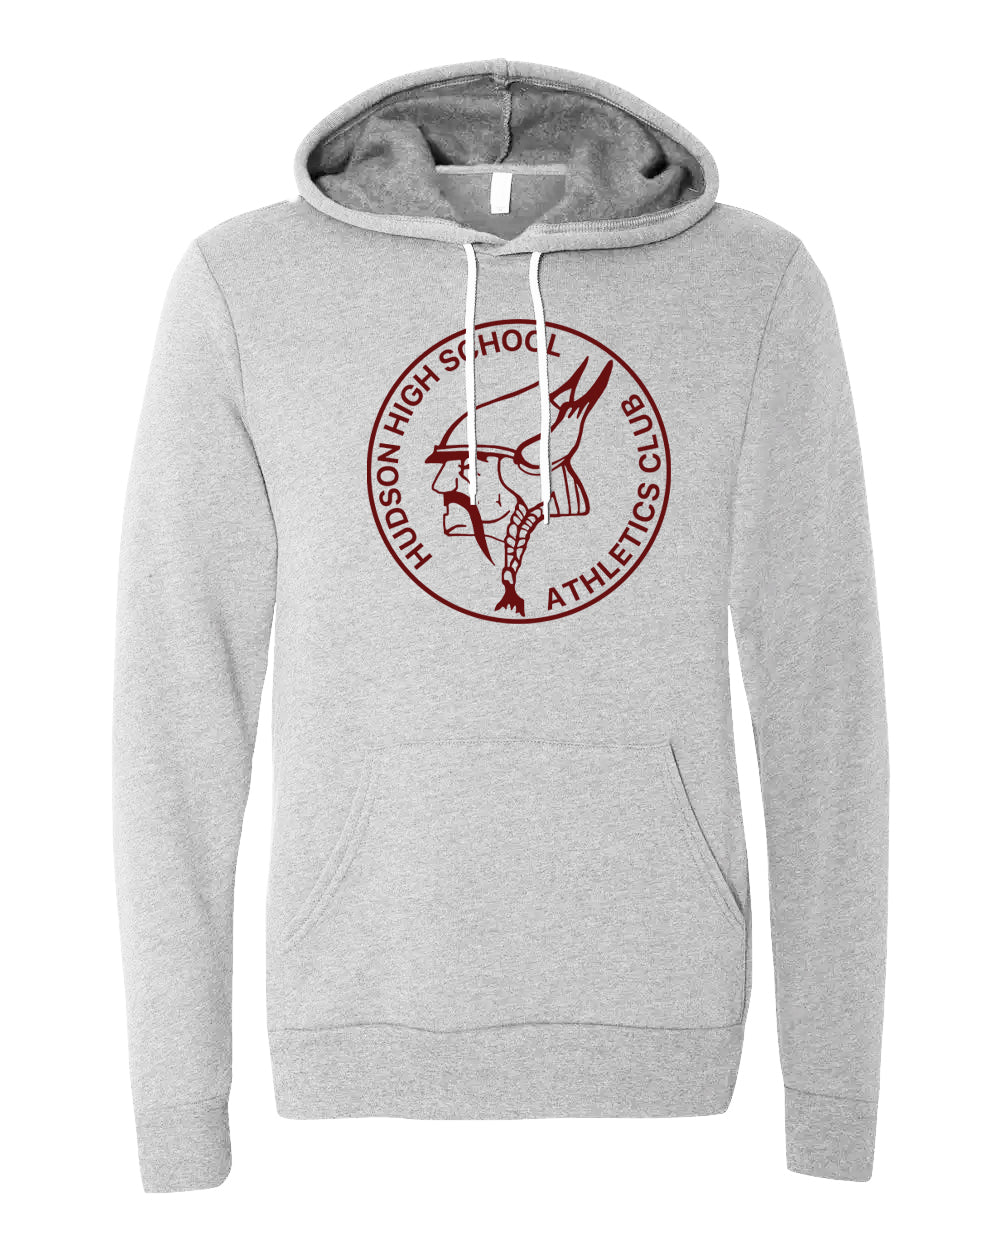 VINTAGE HHS ATHLETICS CLUB Hoodies | Unsettled Apparel